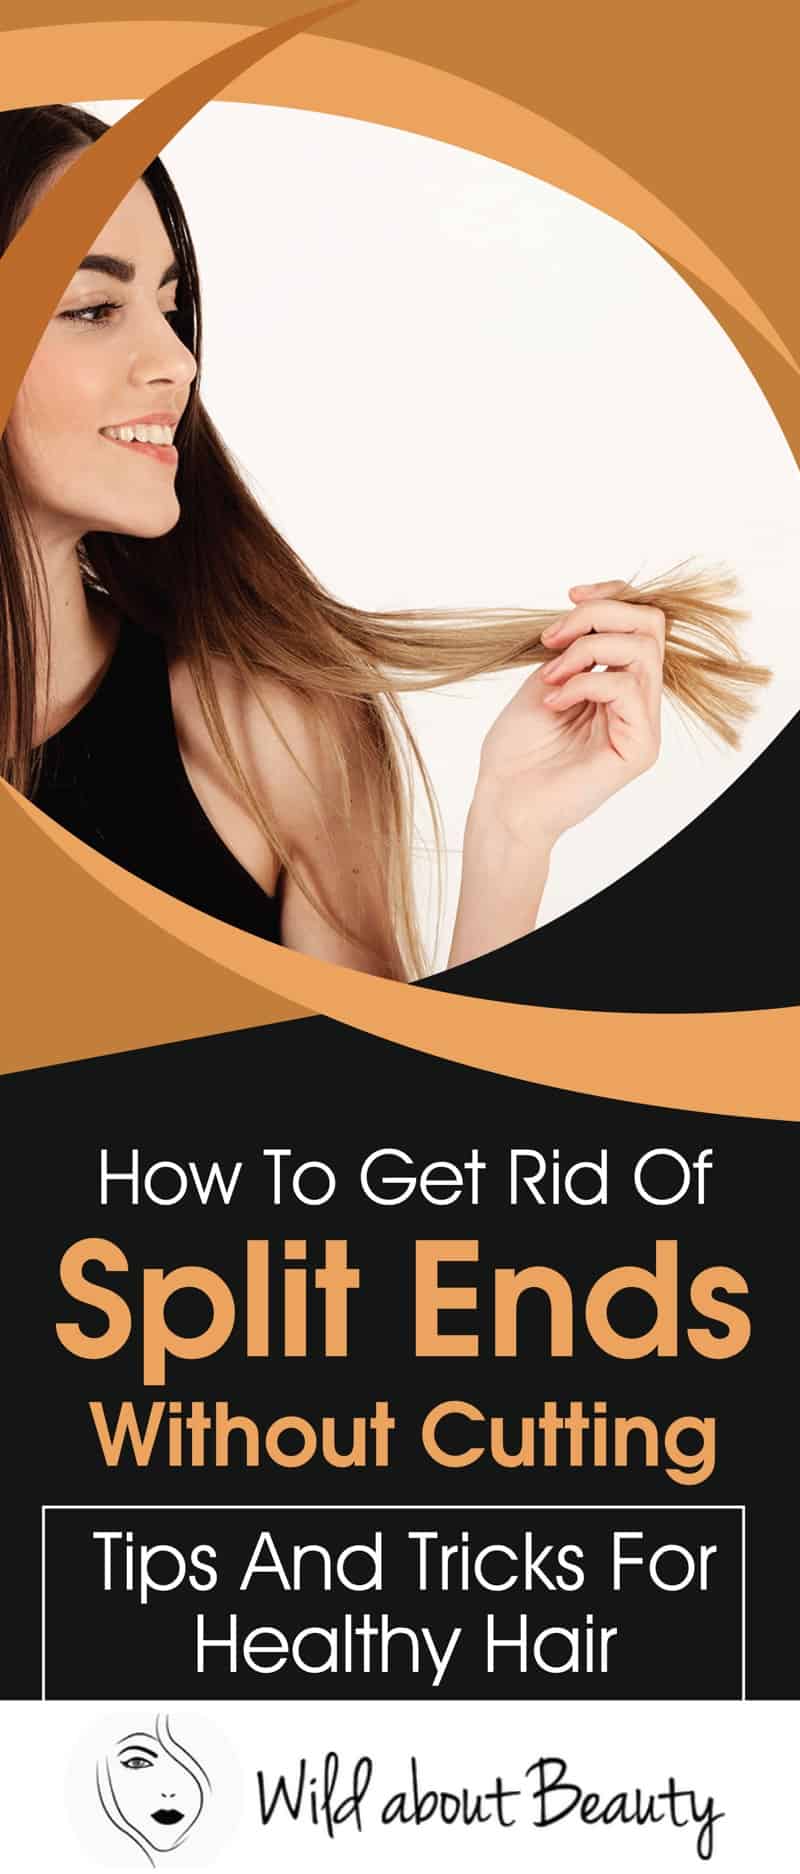 How To Get Rid Of Split Ends Without Cutting